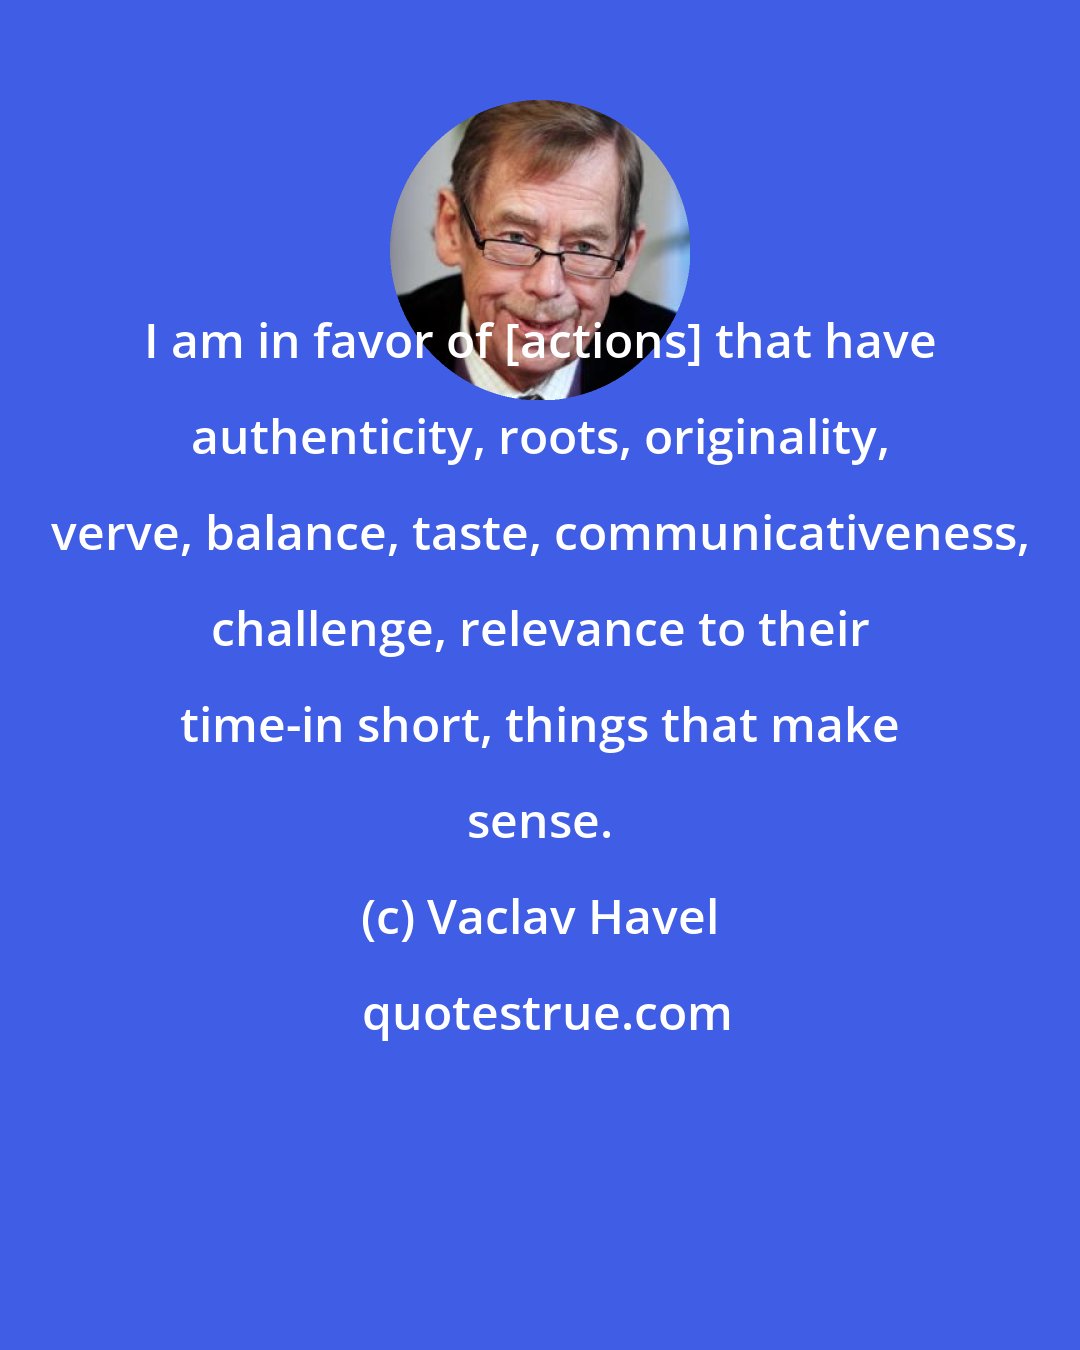 Vaclav Havel: I am in favor of [actions] that have authenticity, roots, originality, verve, balance, taste, communicativeness, challenge, relevance to their time-in short, things that make sense.